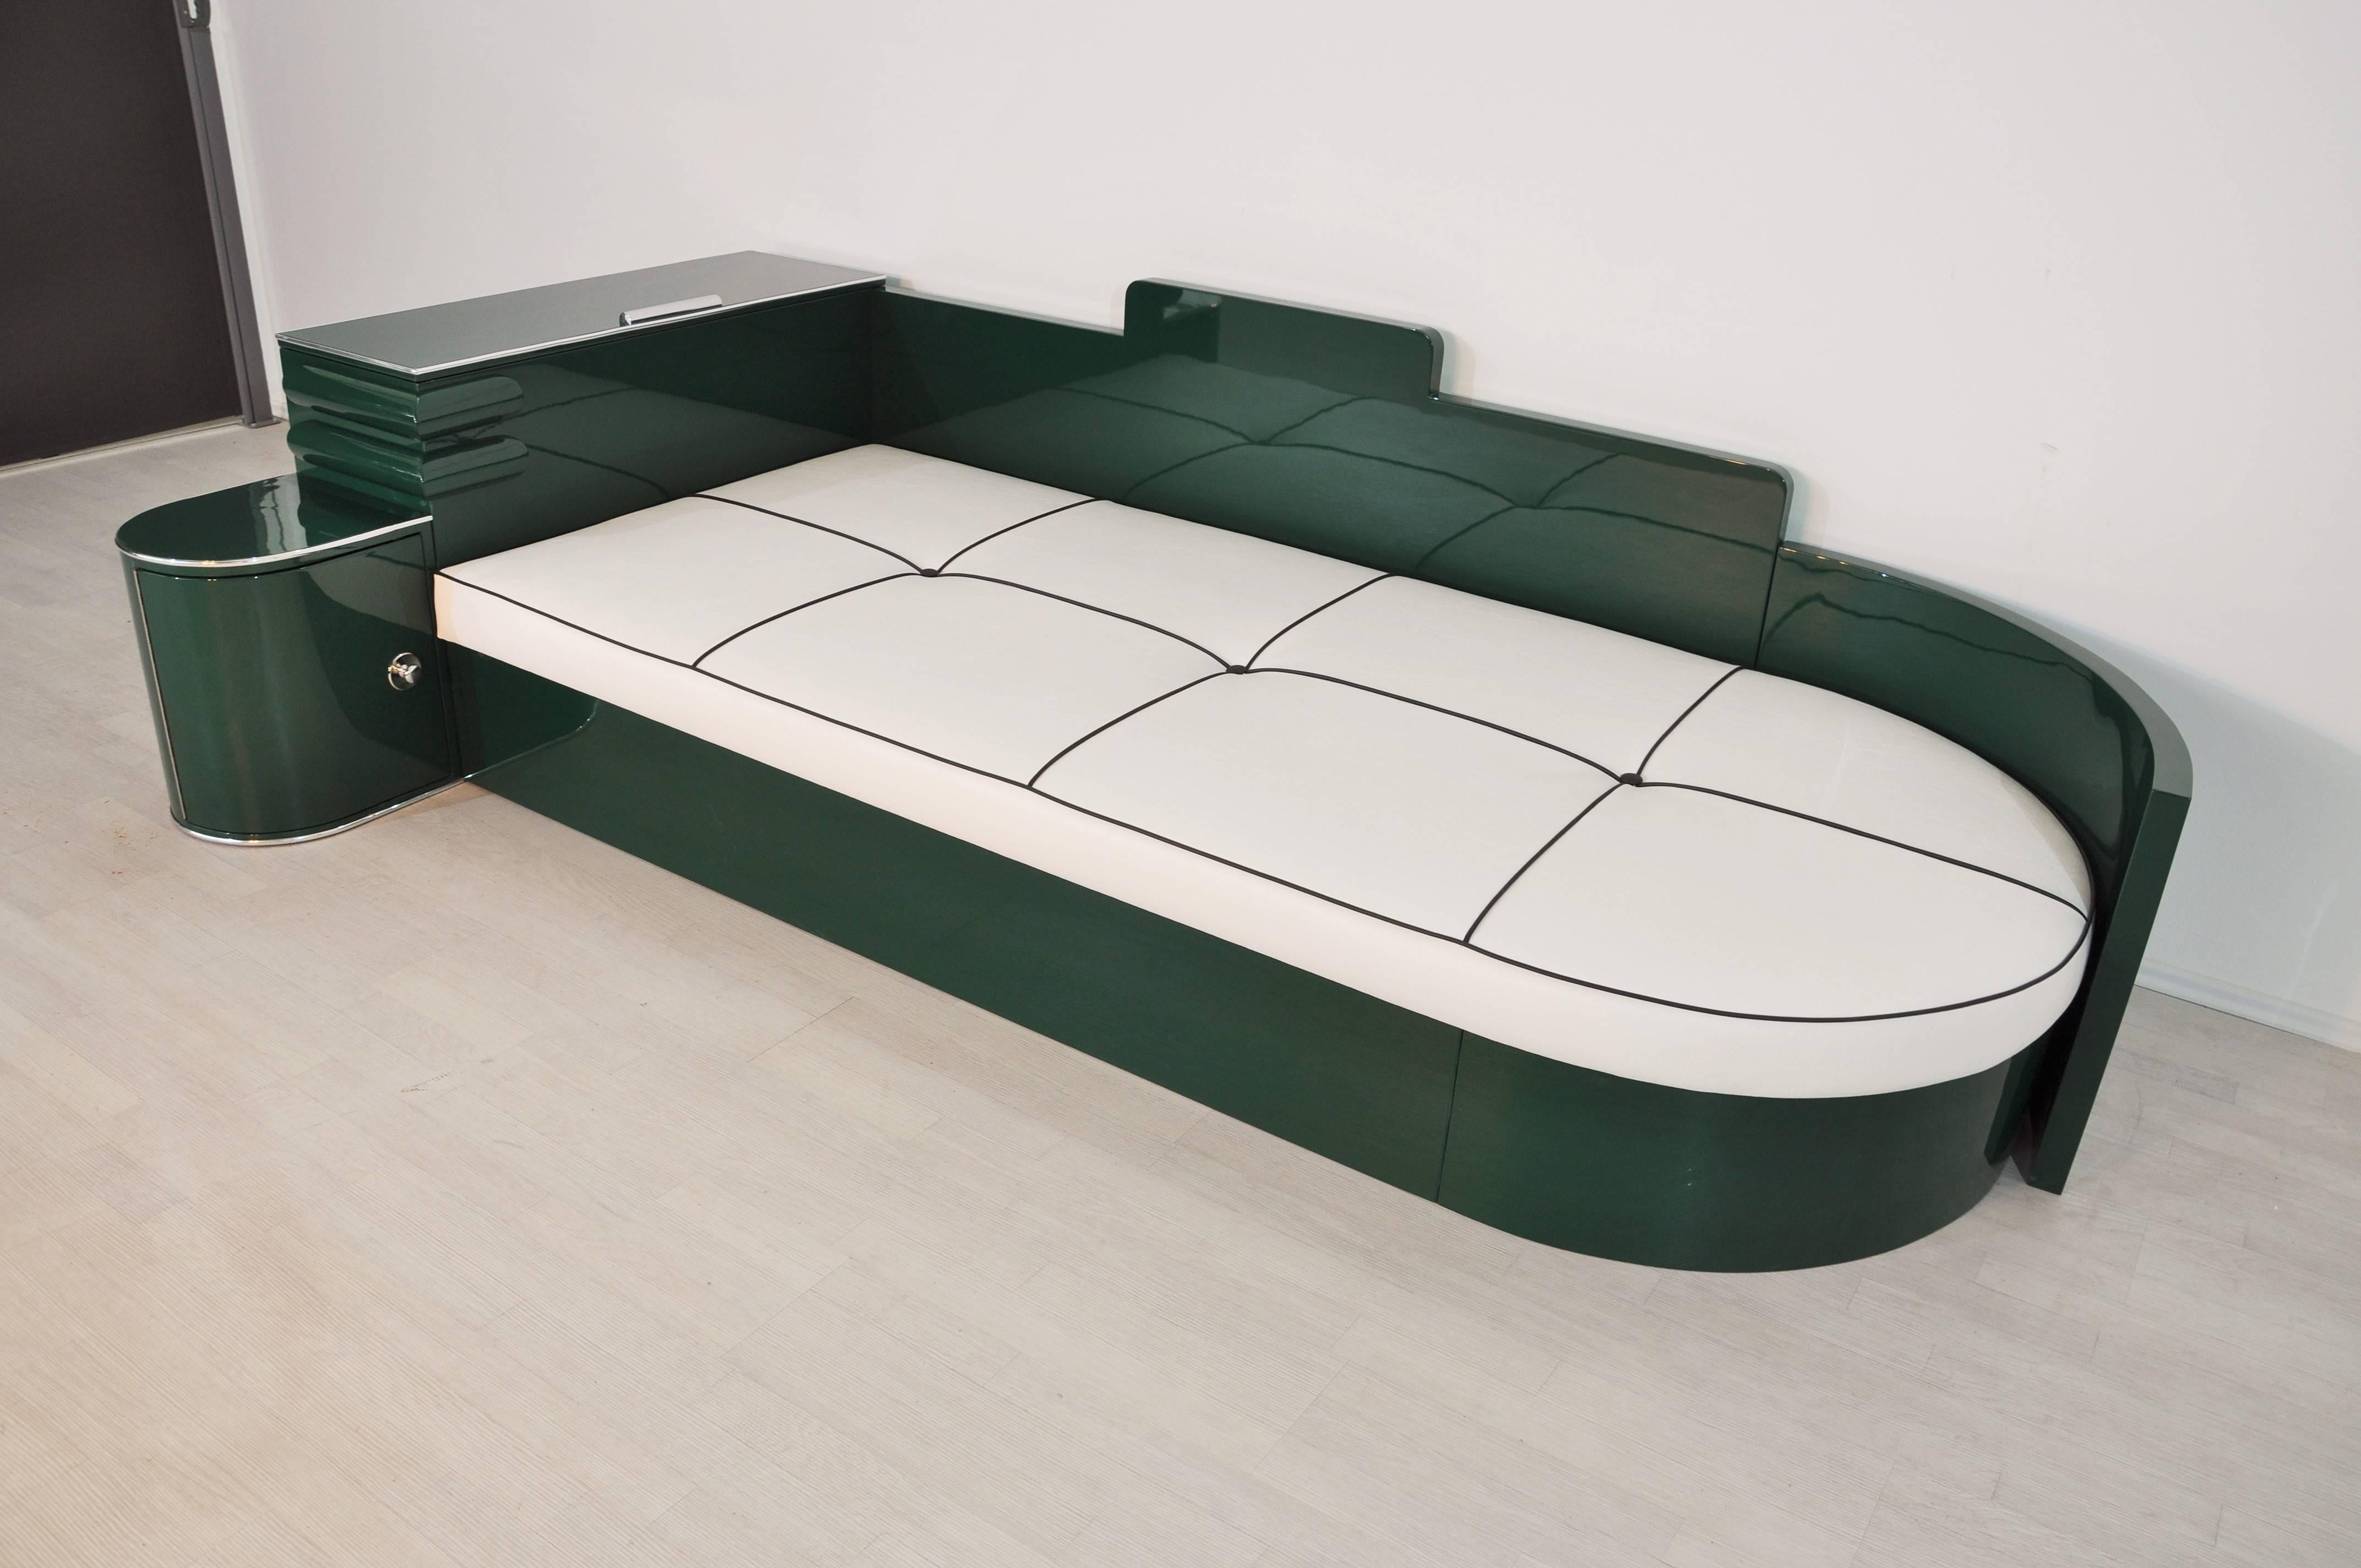 Wonderful Art Deco daybed with a very unique Jaguar racing green finish. To achieve a perfect and long-lasting quality ,the special hue is applied with up to 10 layers of lacquer. The french Daybed offers a simple yet detailed design wich is typical